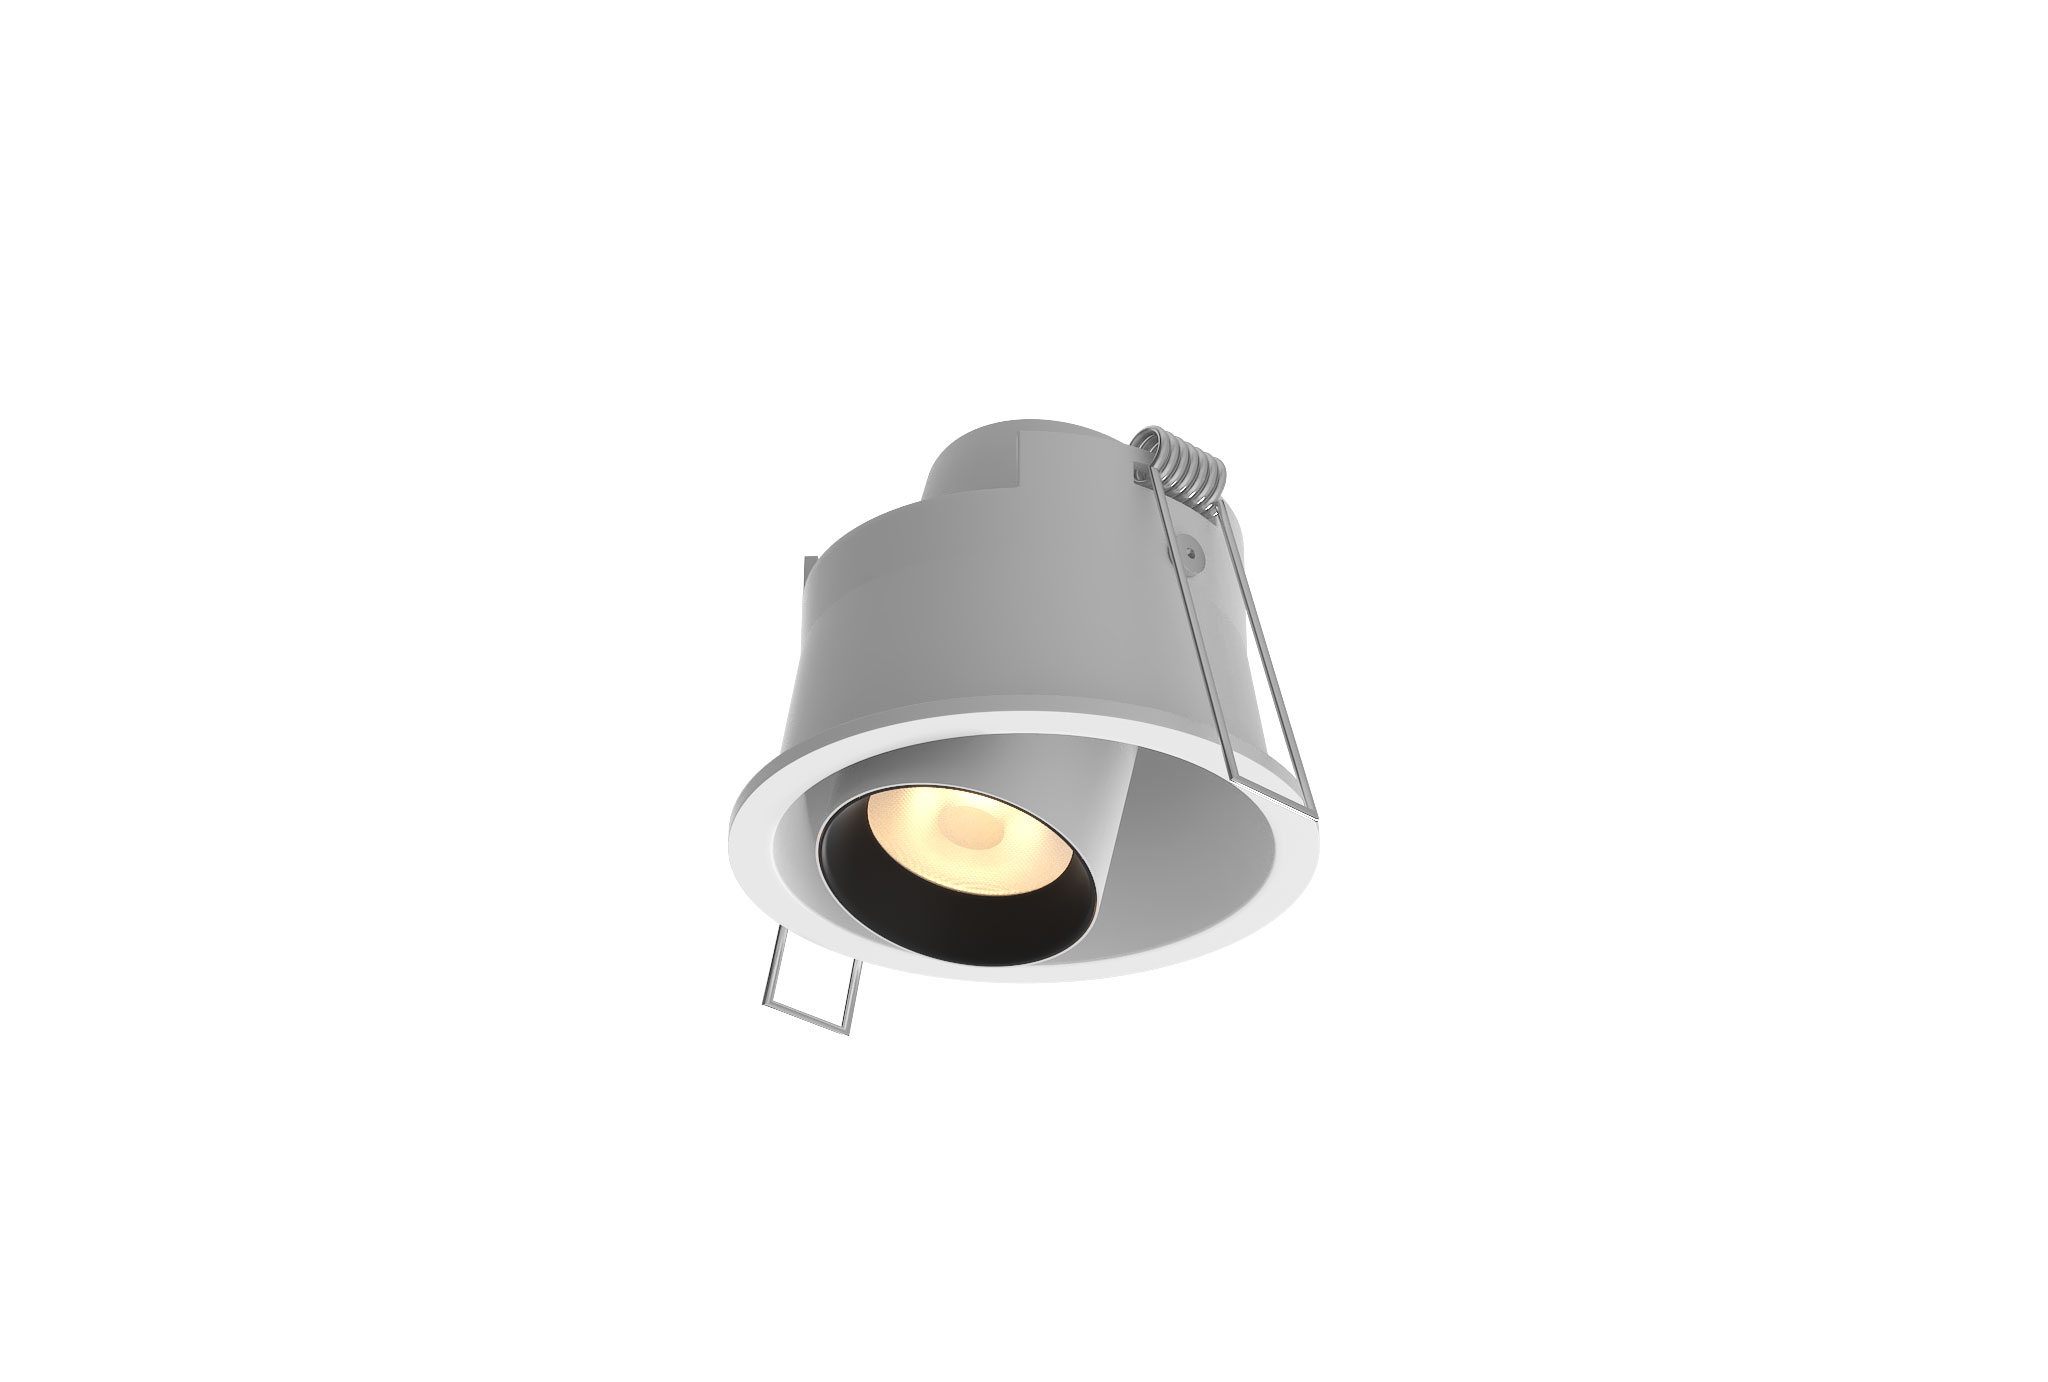 adjustable and recessed white spotlight with black trim